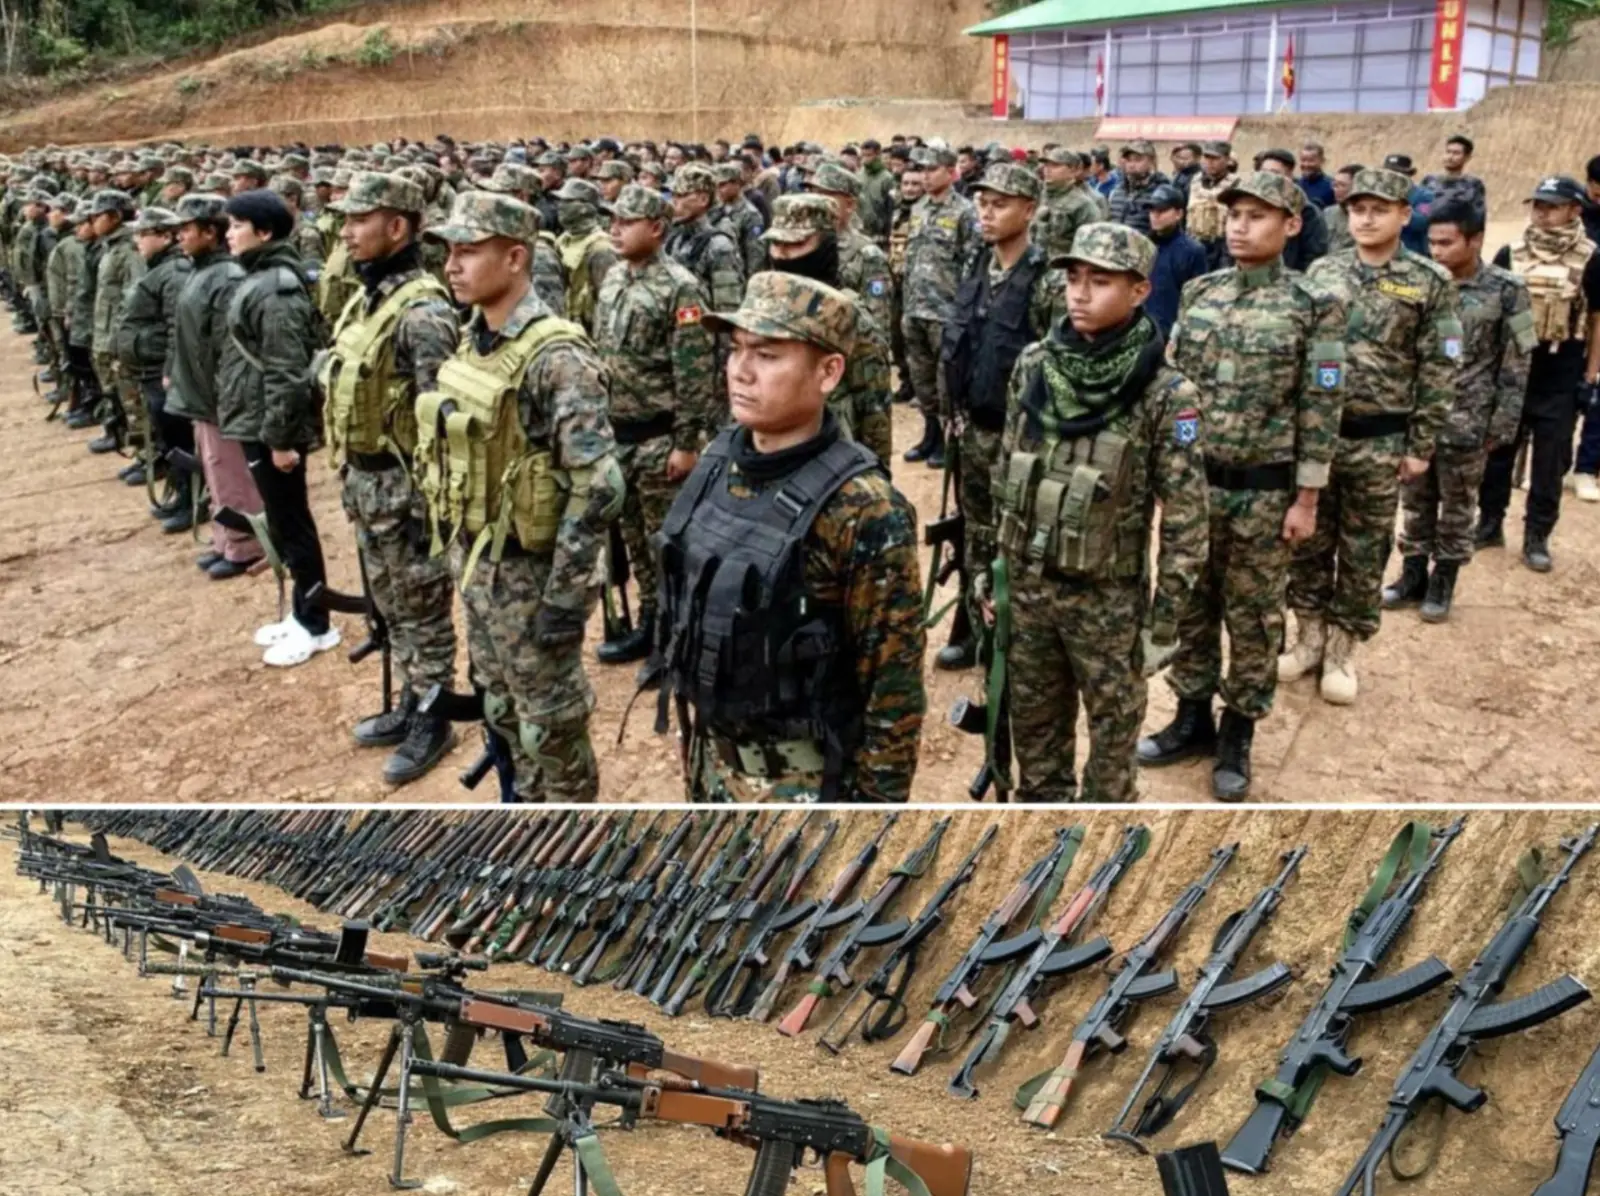 UNLF found to be involved in violent activities and to have broken the ceasefire agreement in Manipur